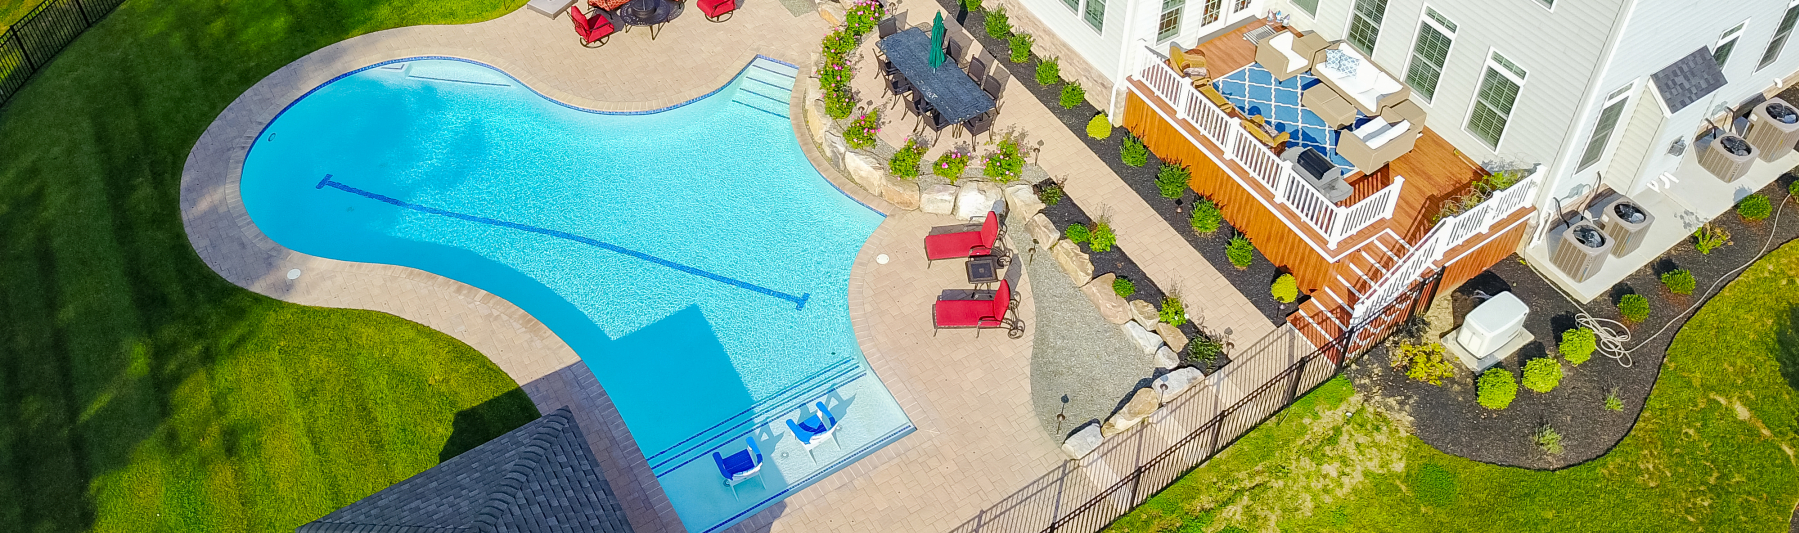 A large deck overlooking the pool provides another generous seating area for conversation and easy access to the home.